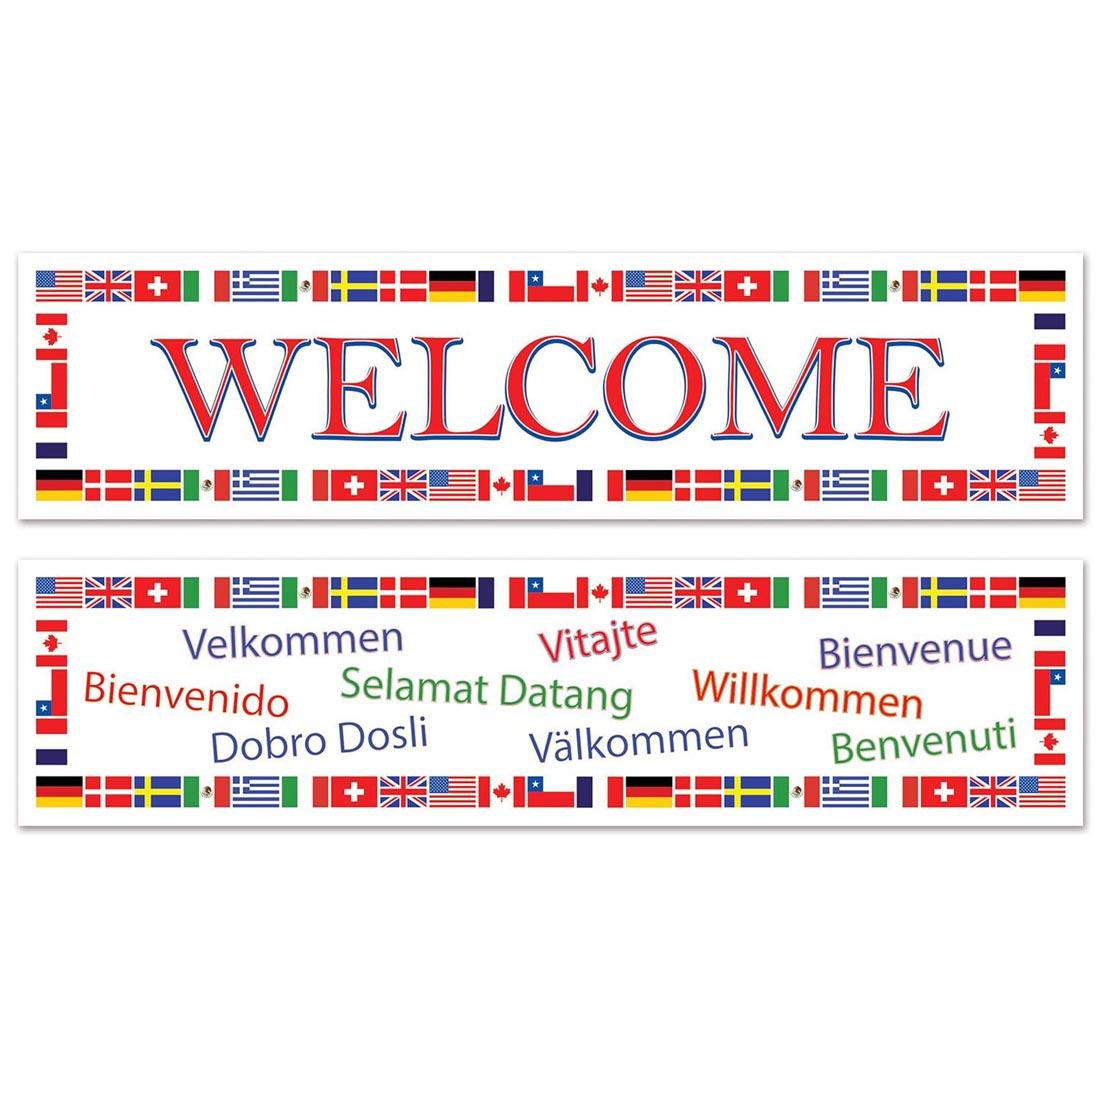 International Welcome Banners By Beistle Company